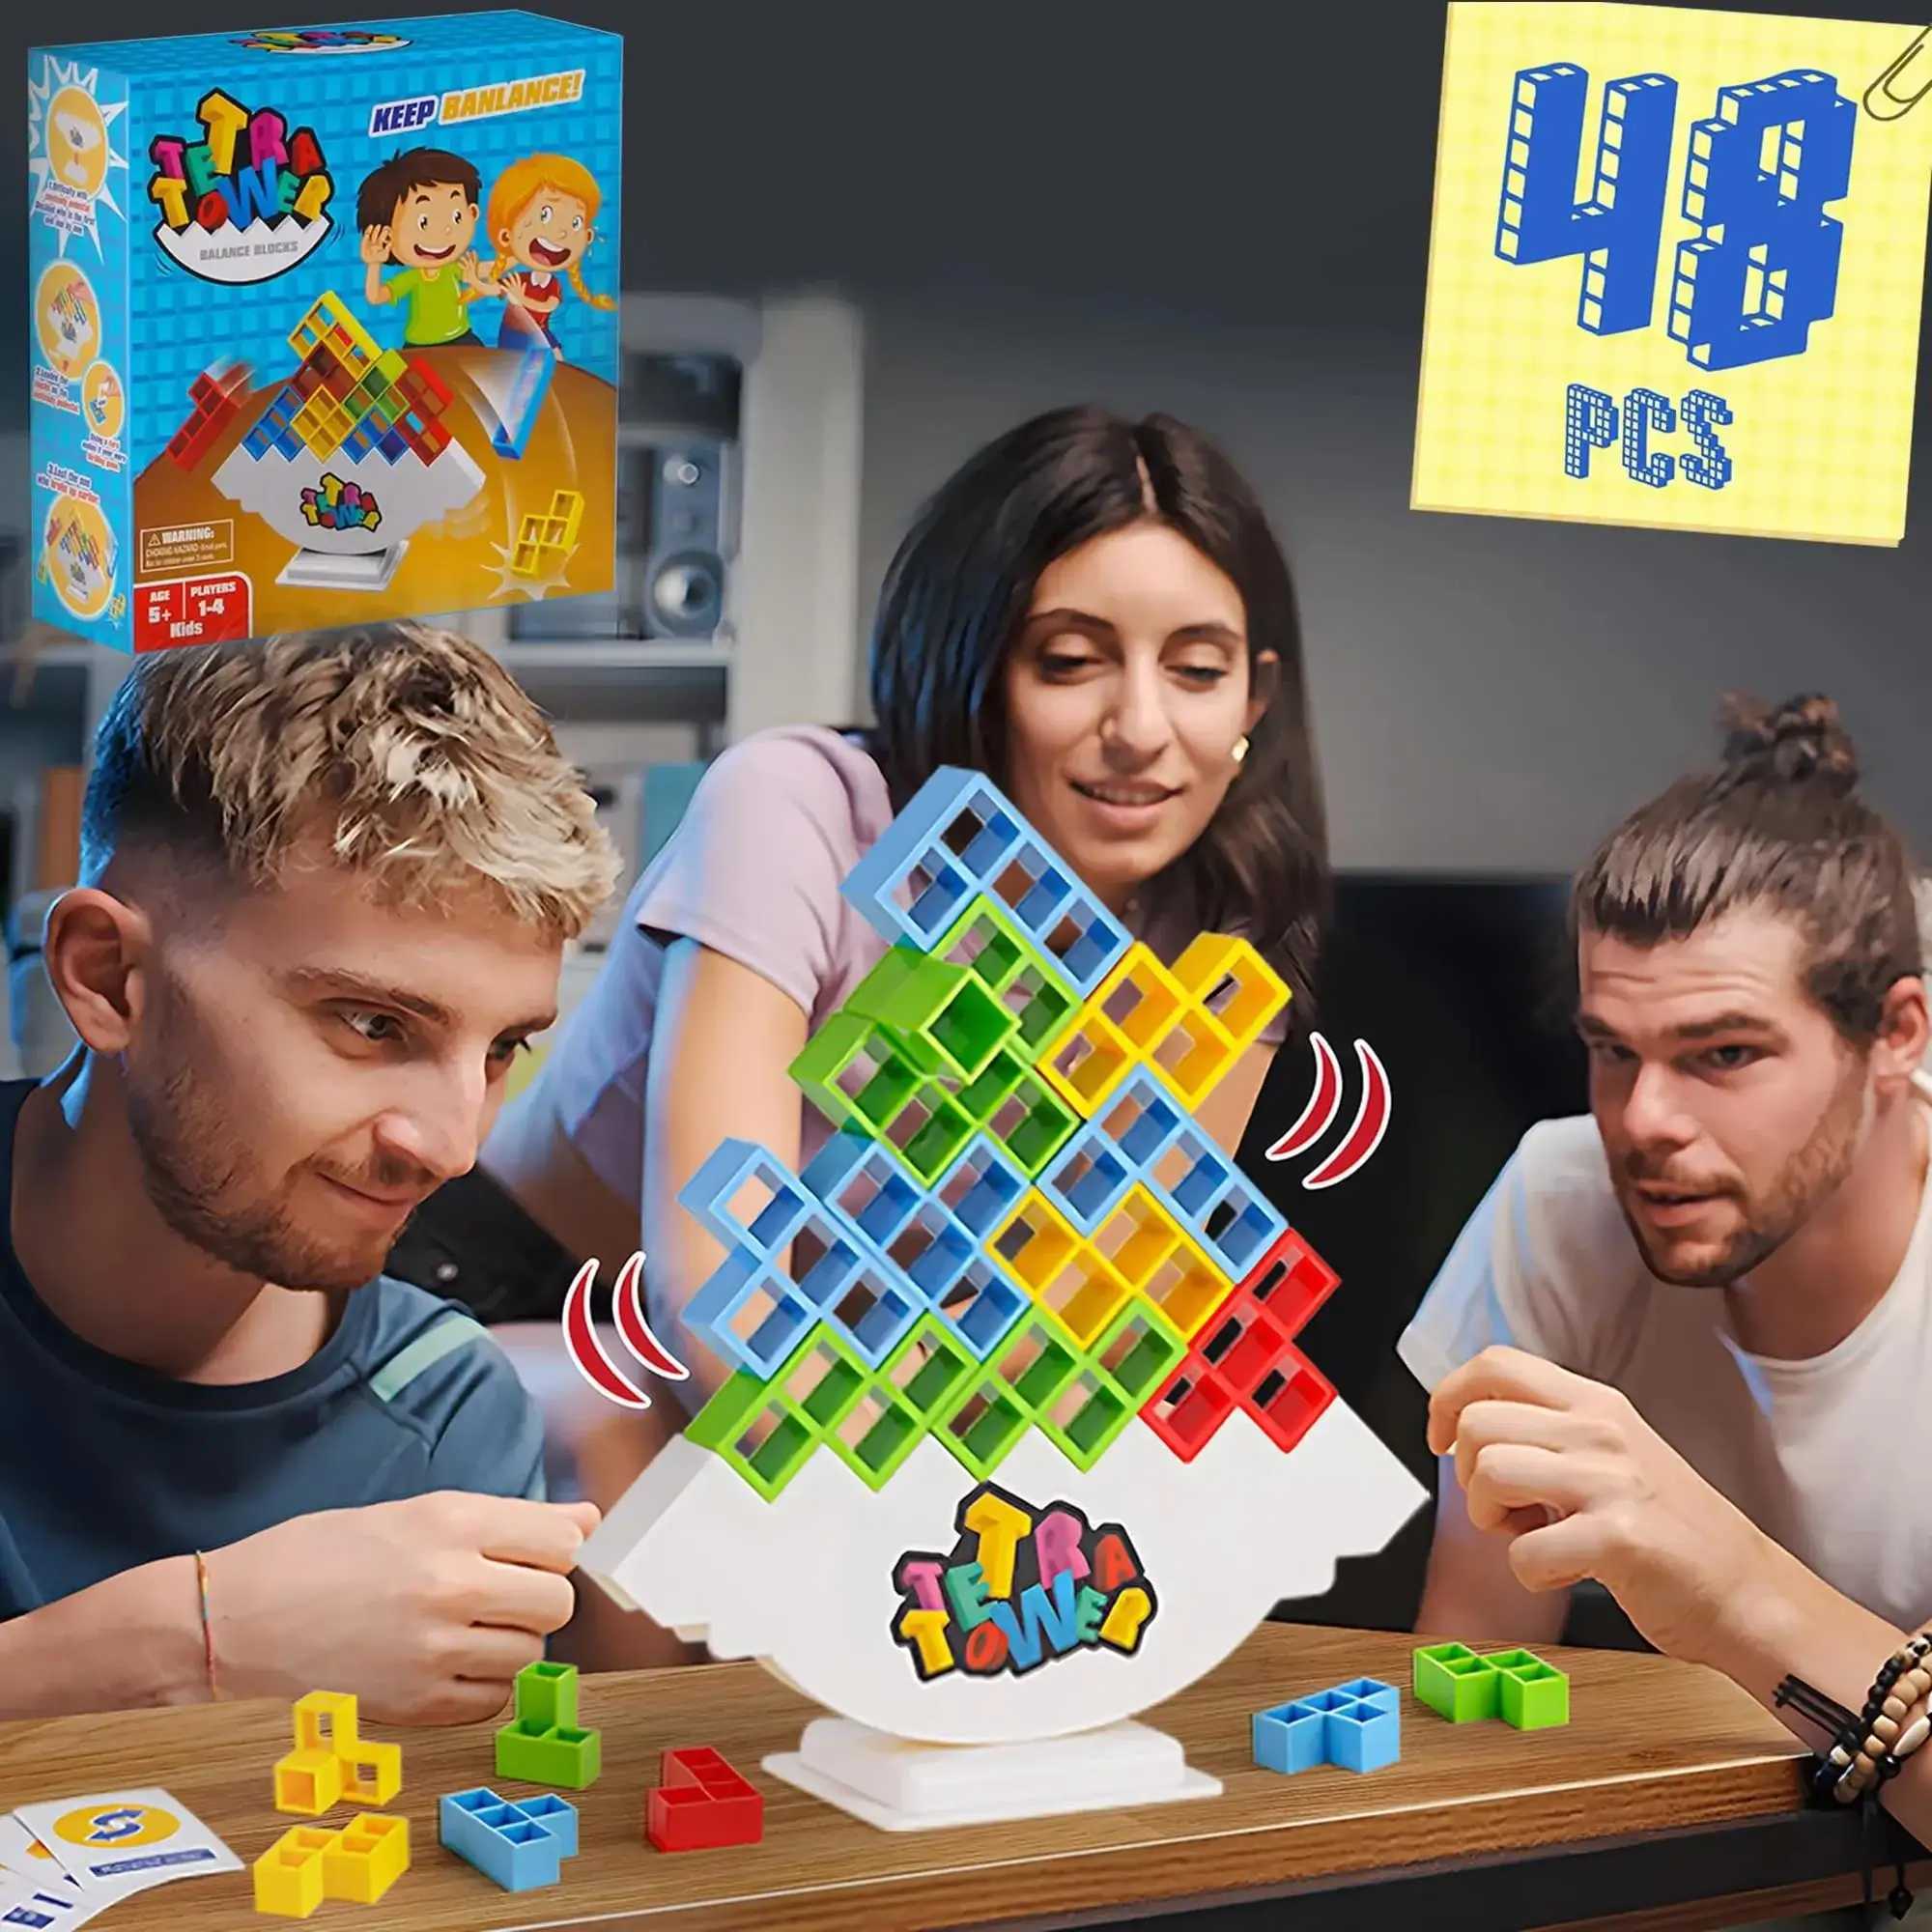 Autres jouets 64 Tetra Tower Fun Balance Empilled Building Blocs Board Games Board pour enfants Adultes Amis Dormorories Dormoritries Nights Family Nights A245176320